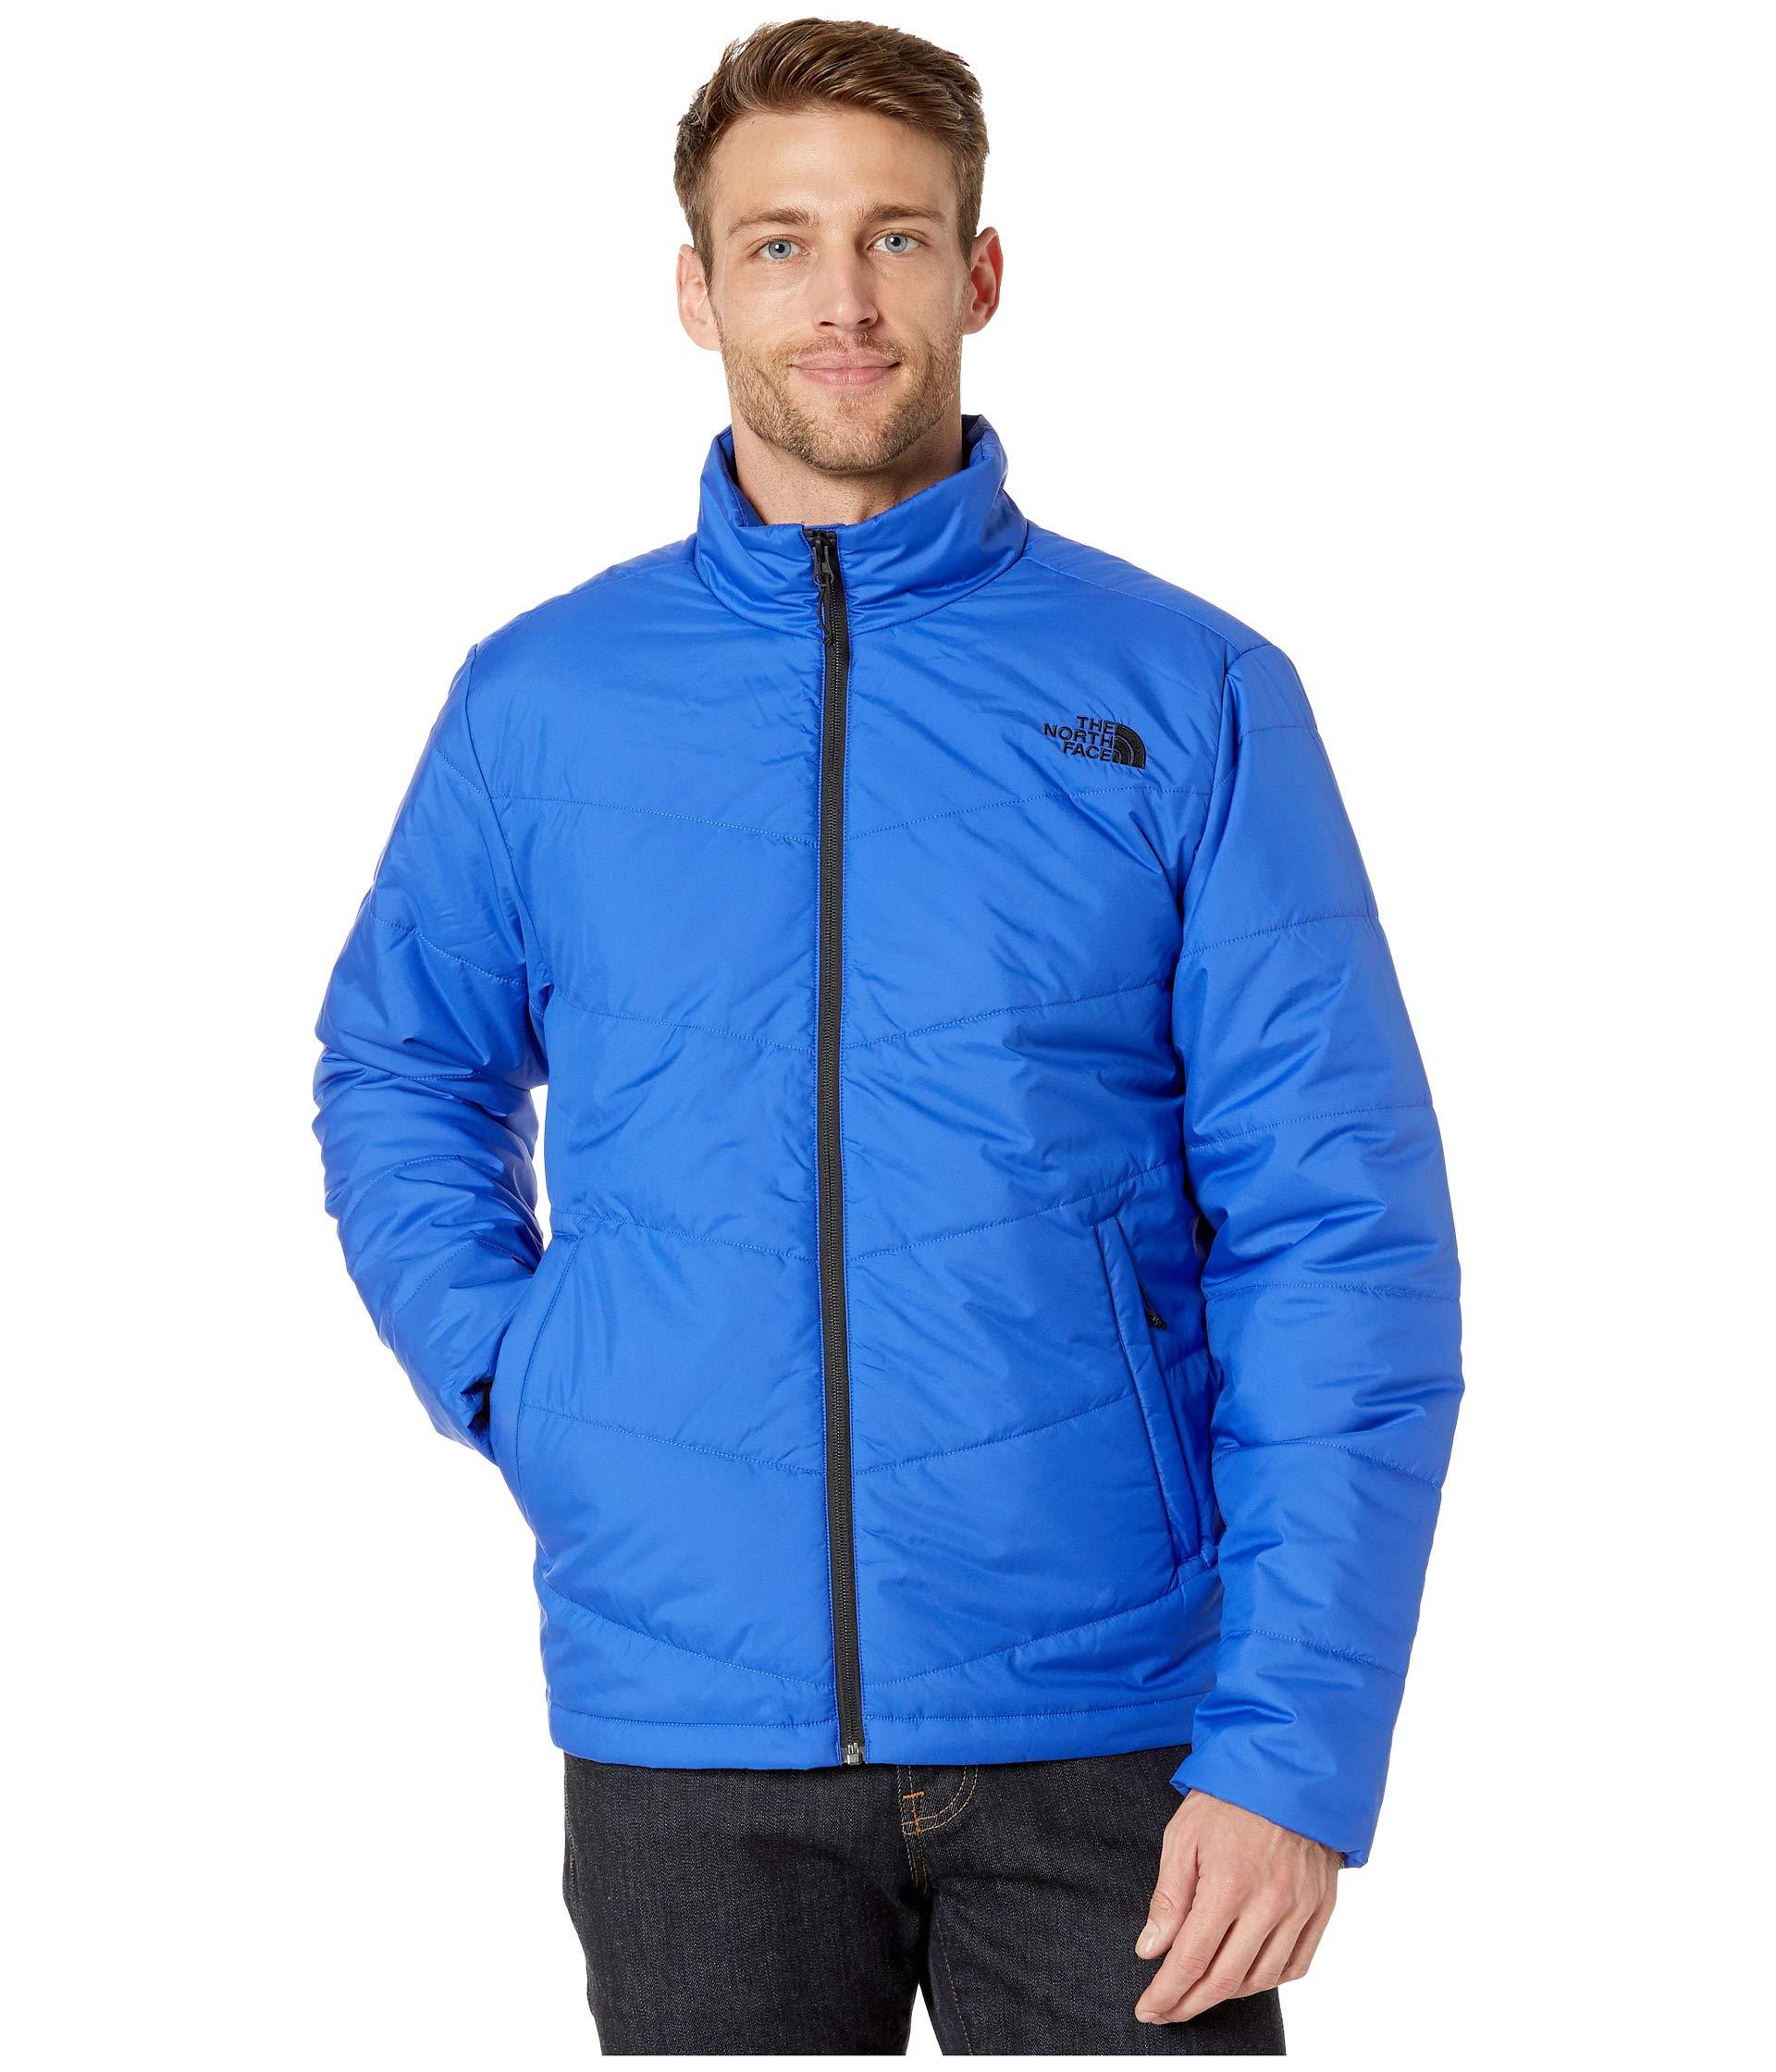 The North Face Synthetic Junction Insulated Jacket in Blue for Men - Lyst